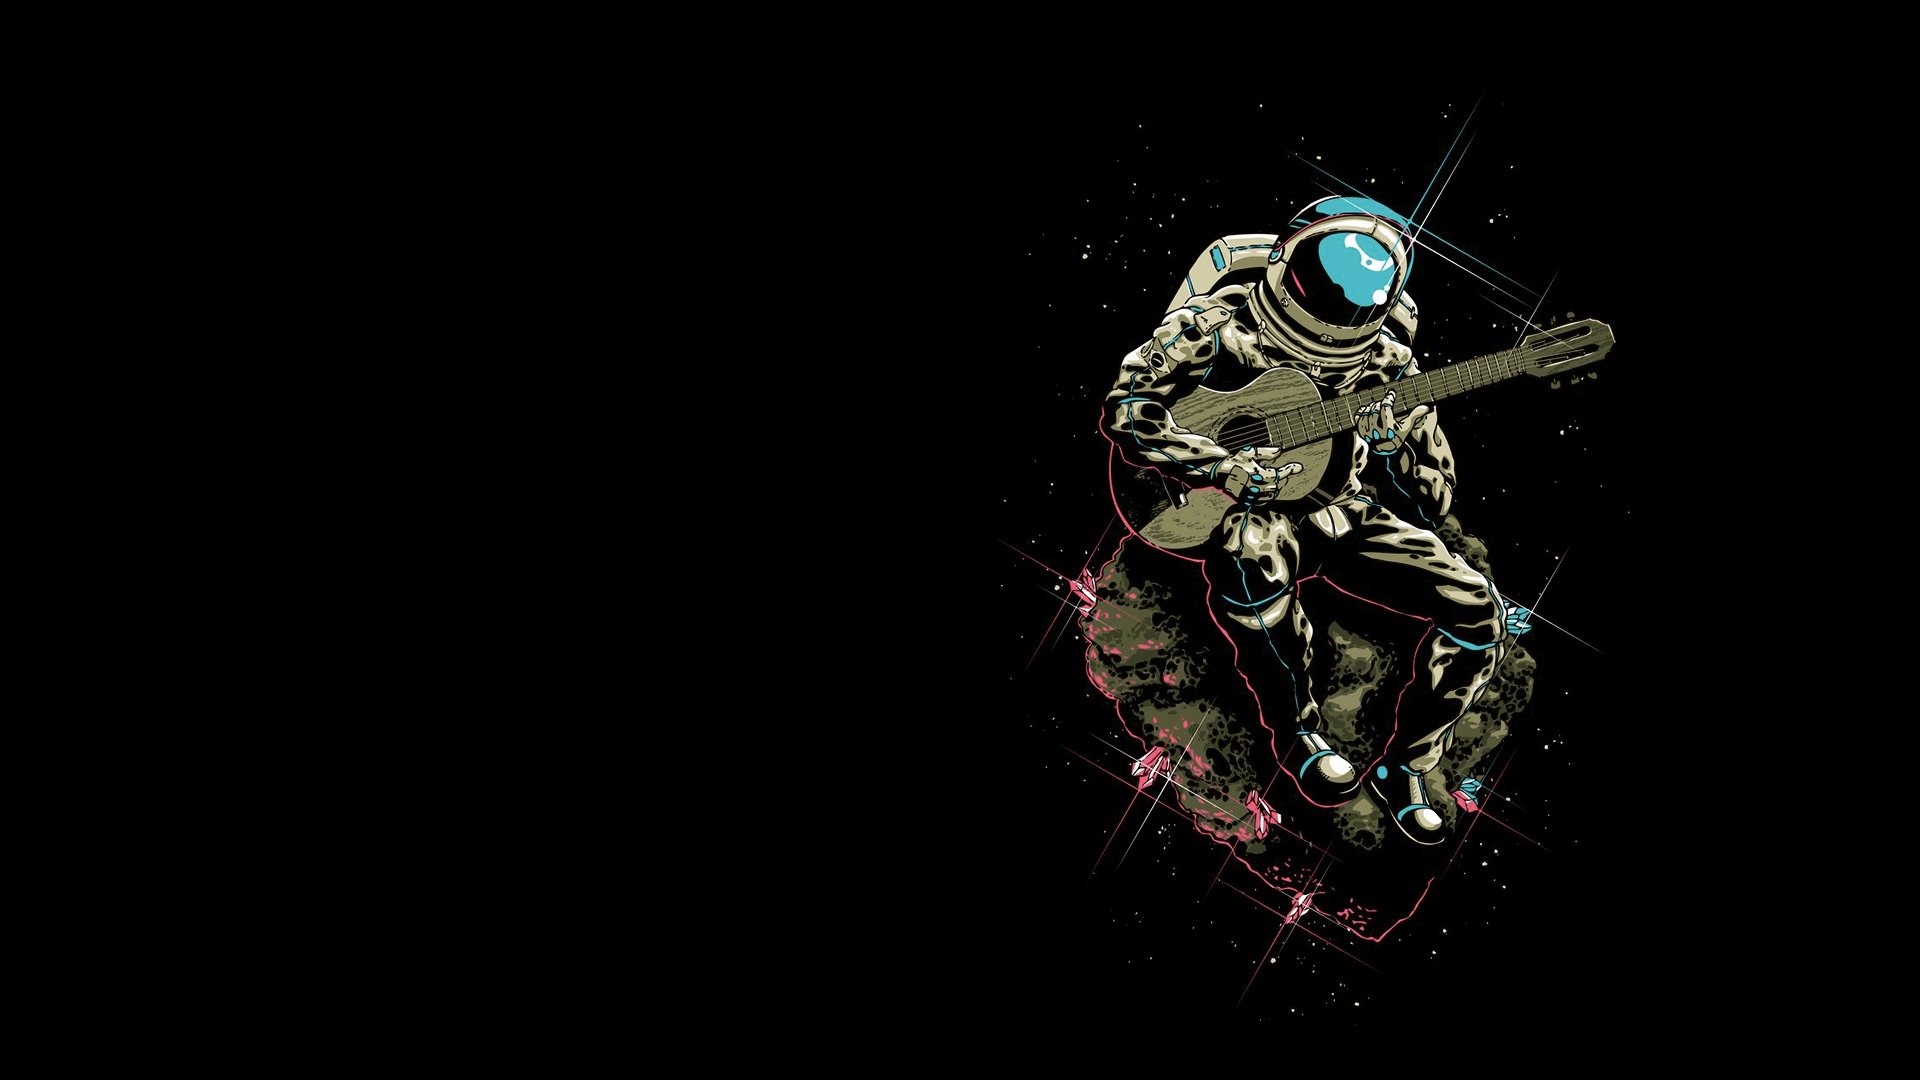 image For > Surreal Astronaut Wallpaper